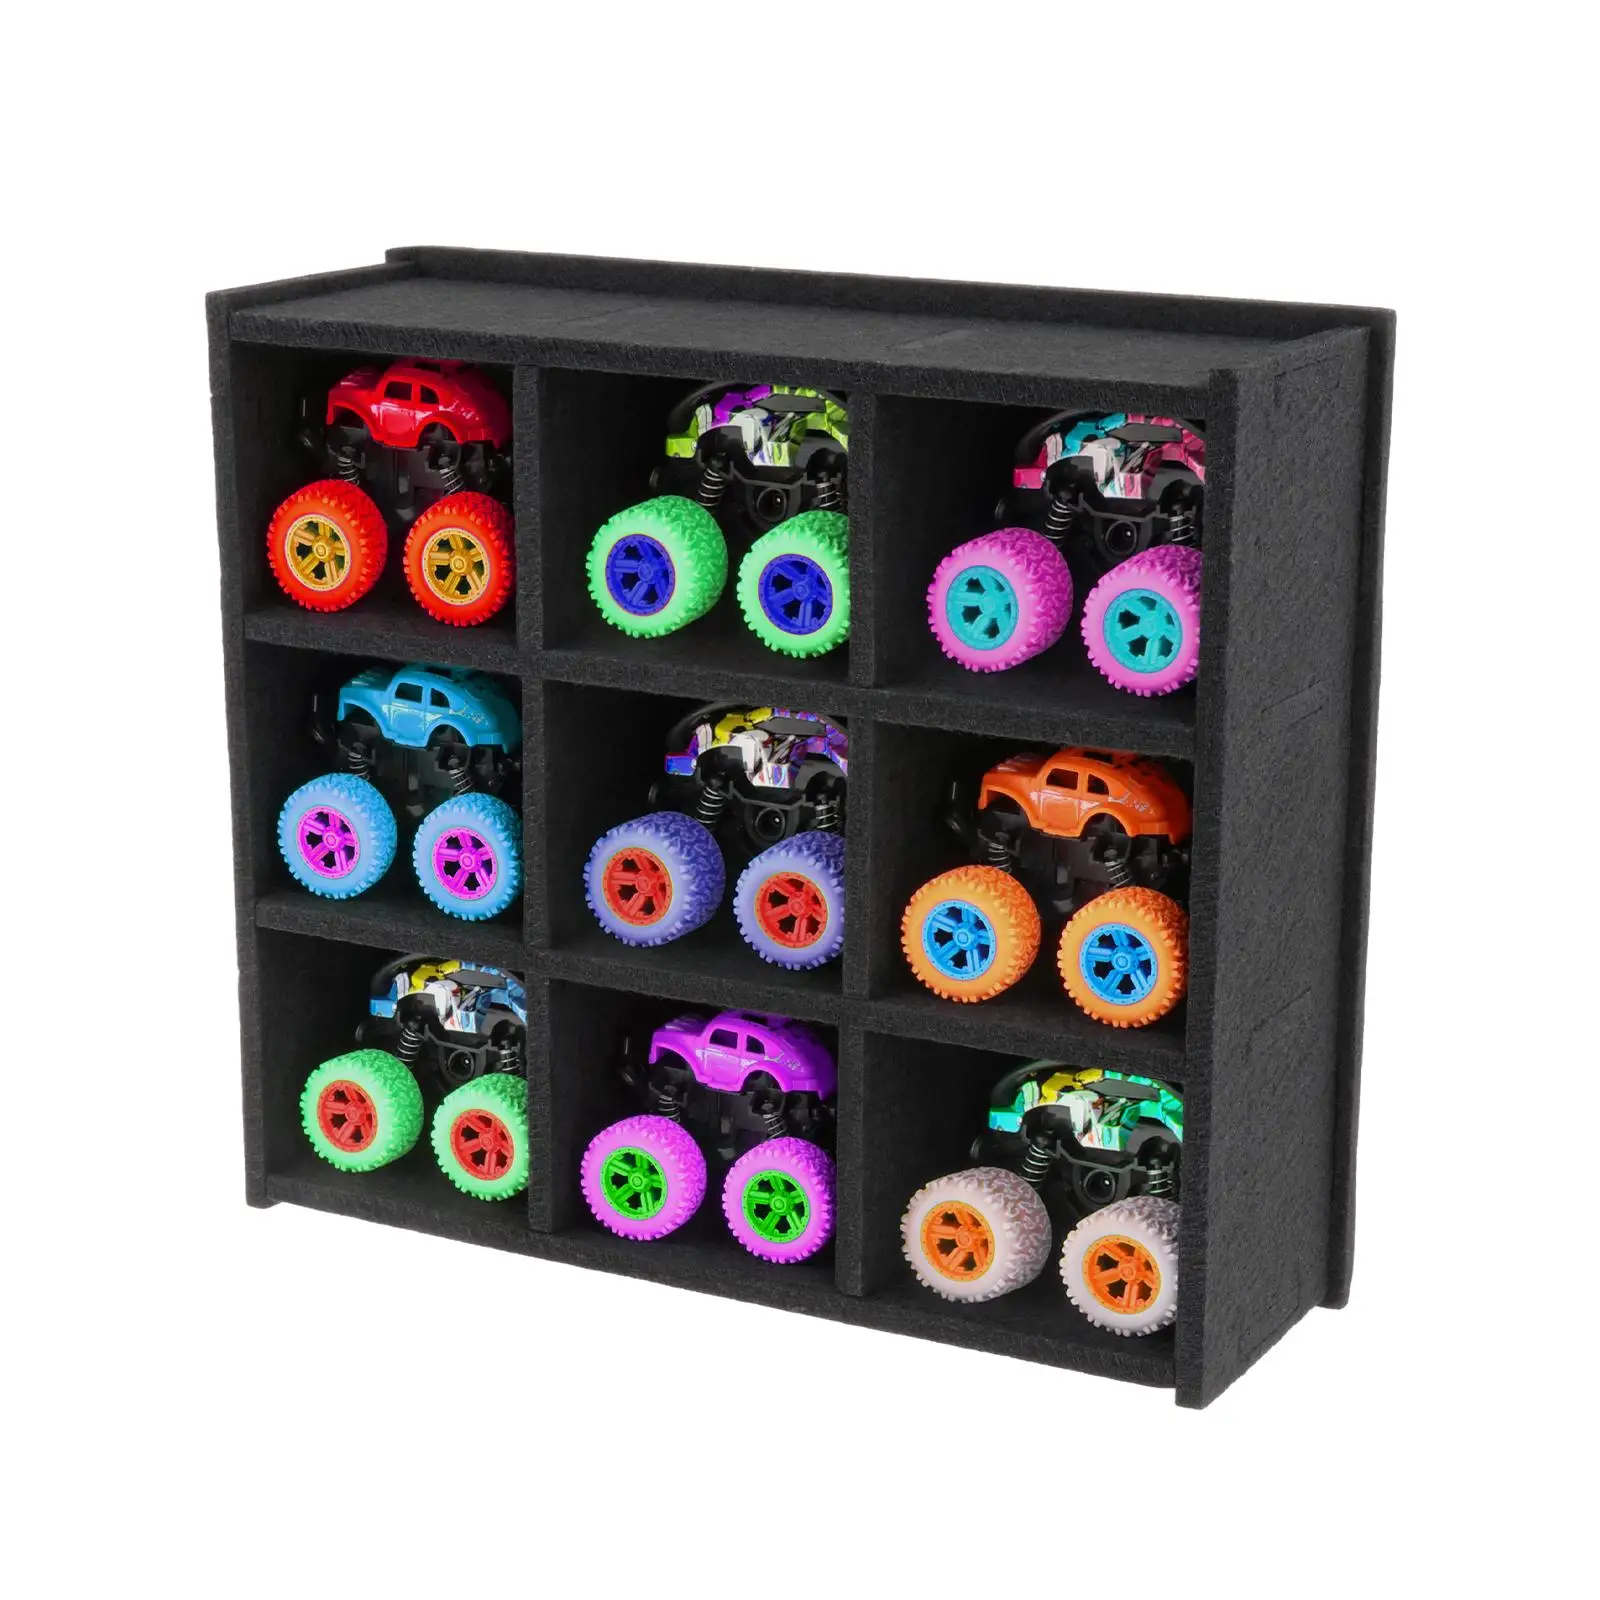 Monster Trucks Toy Wall Mounted Display Case with 9 Slots Compact DIY Assembled for Sorting and Collecting Multifunctional